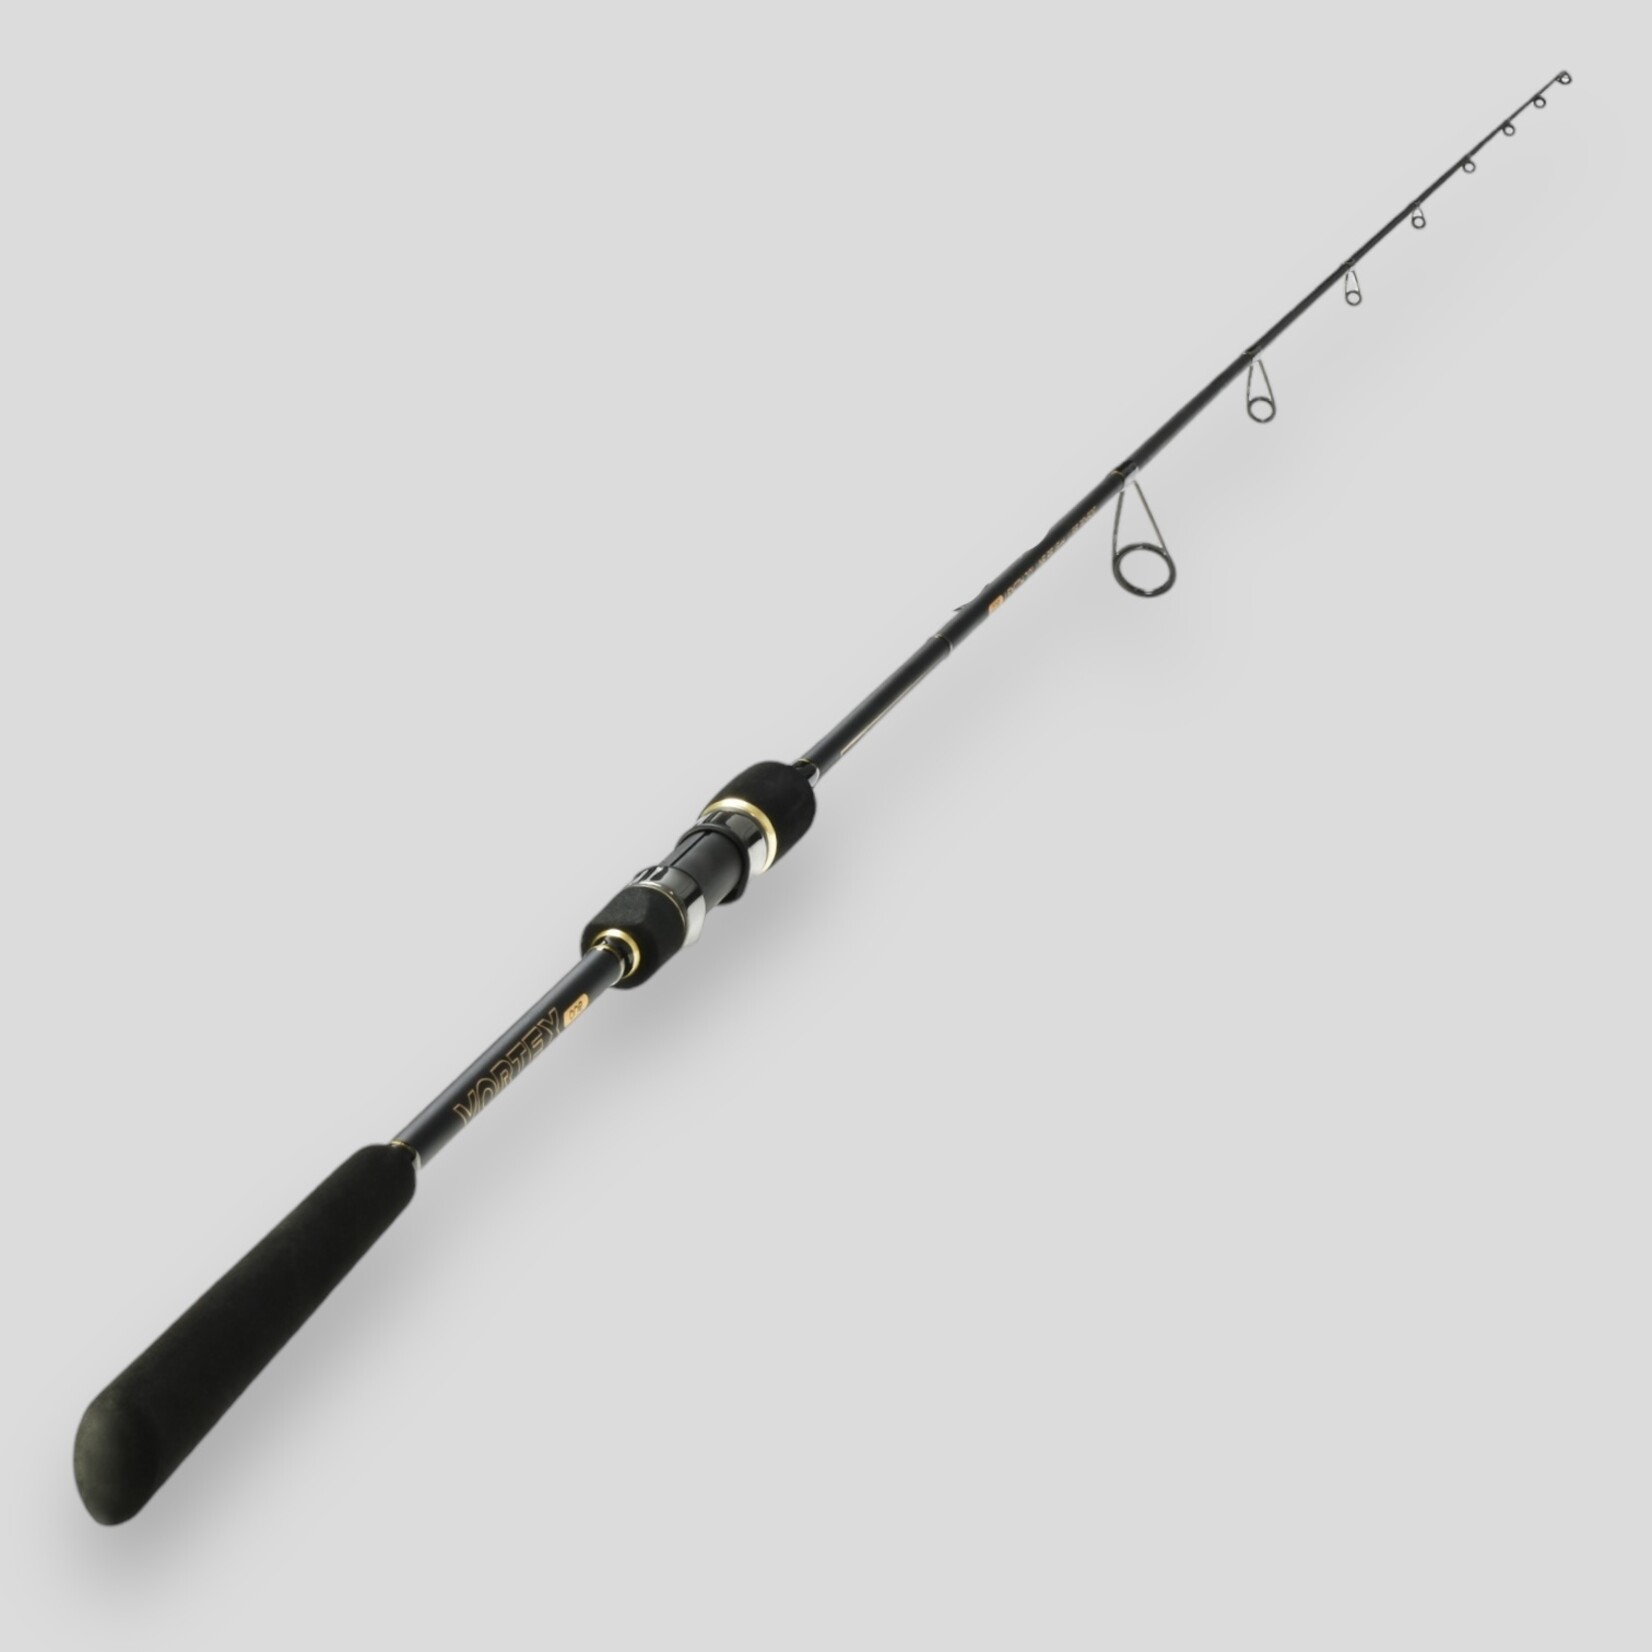 Temple Reef Temple Reef Vortex Spin Rod